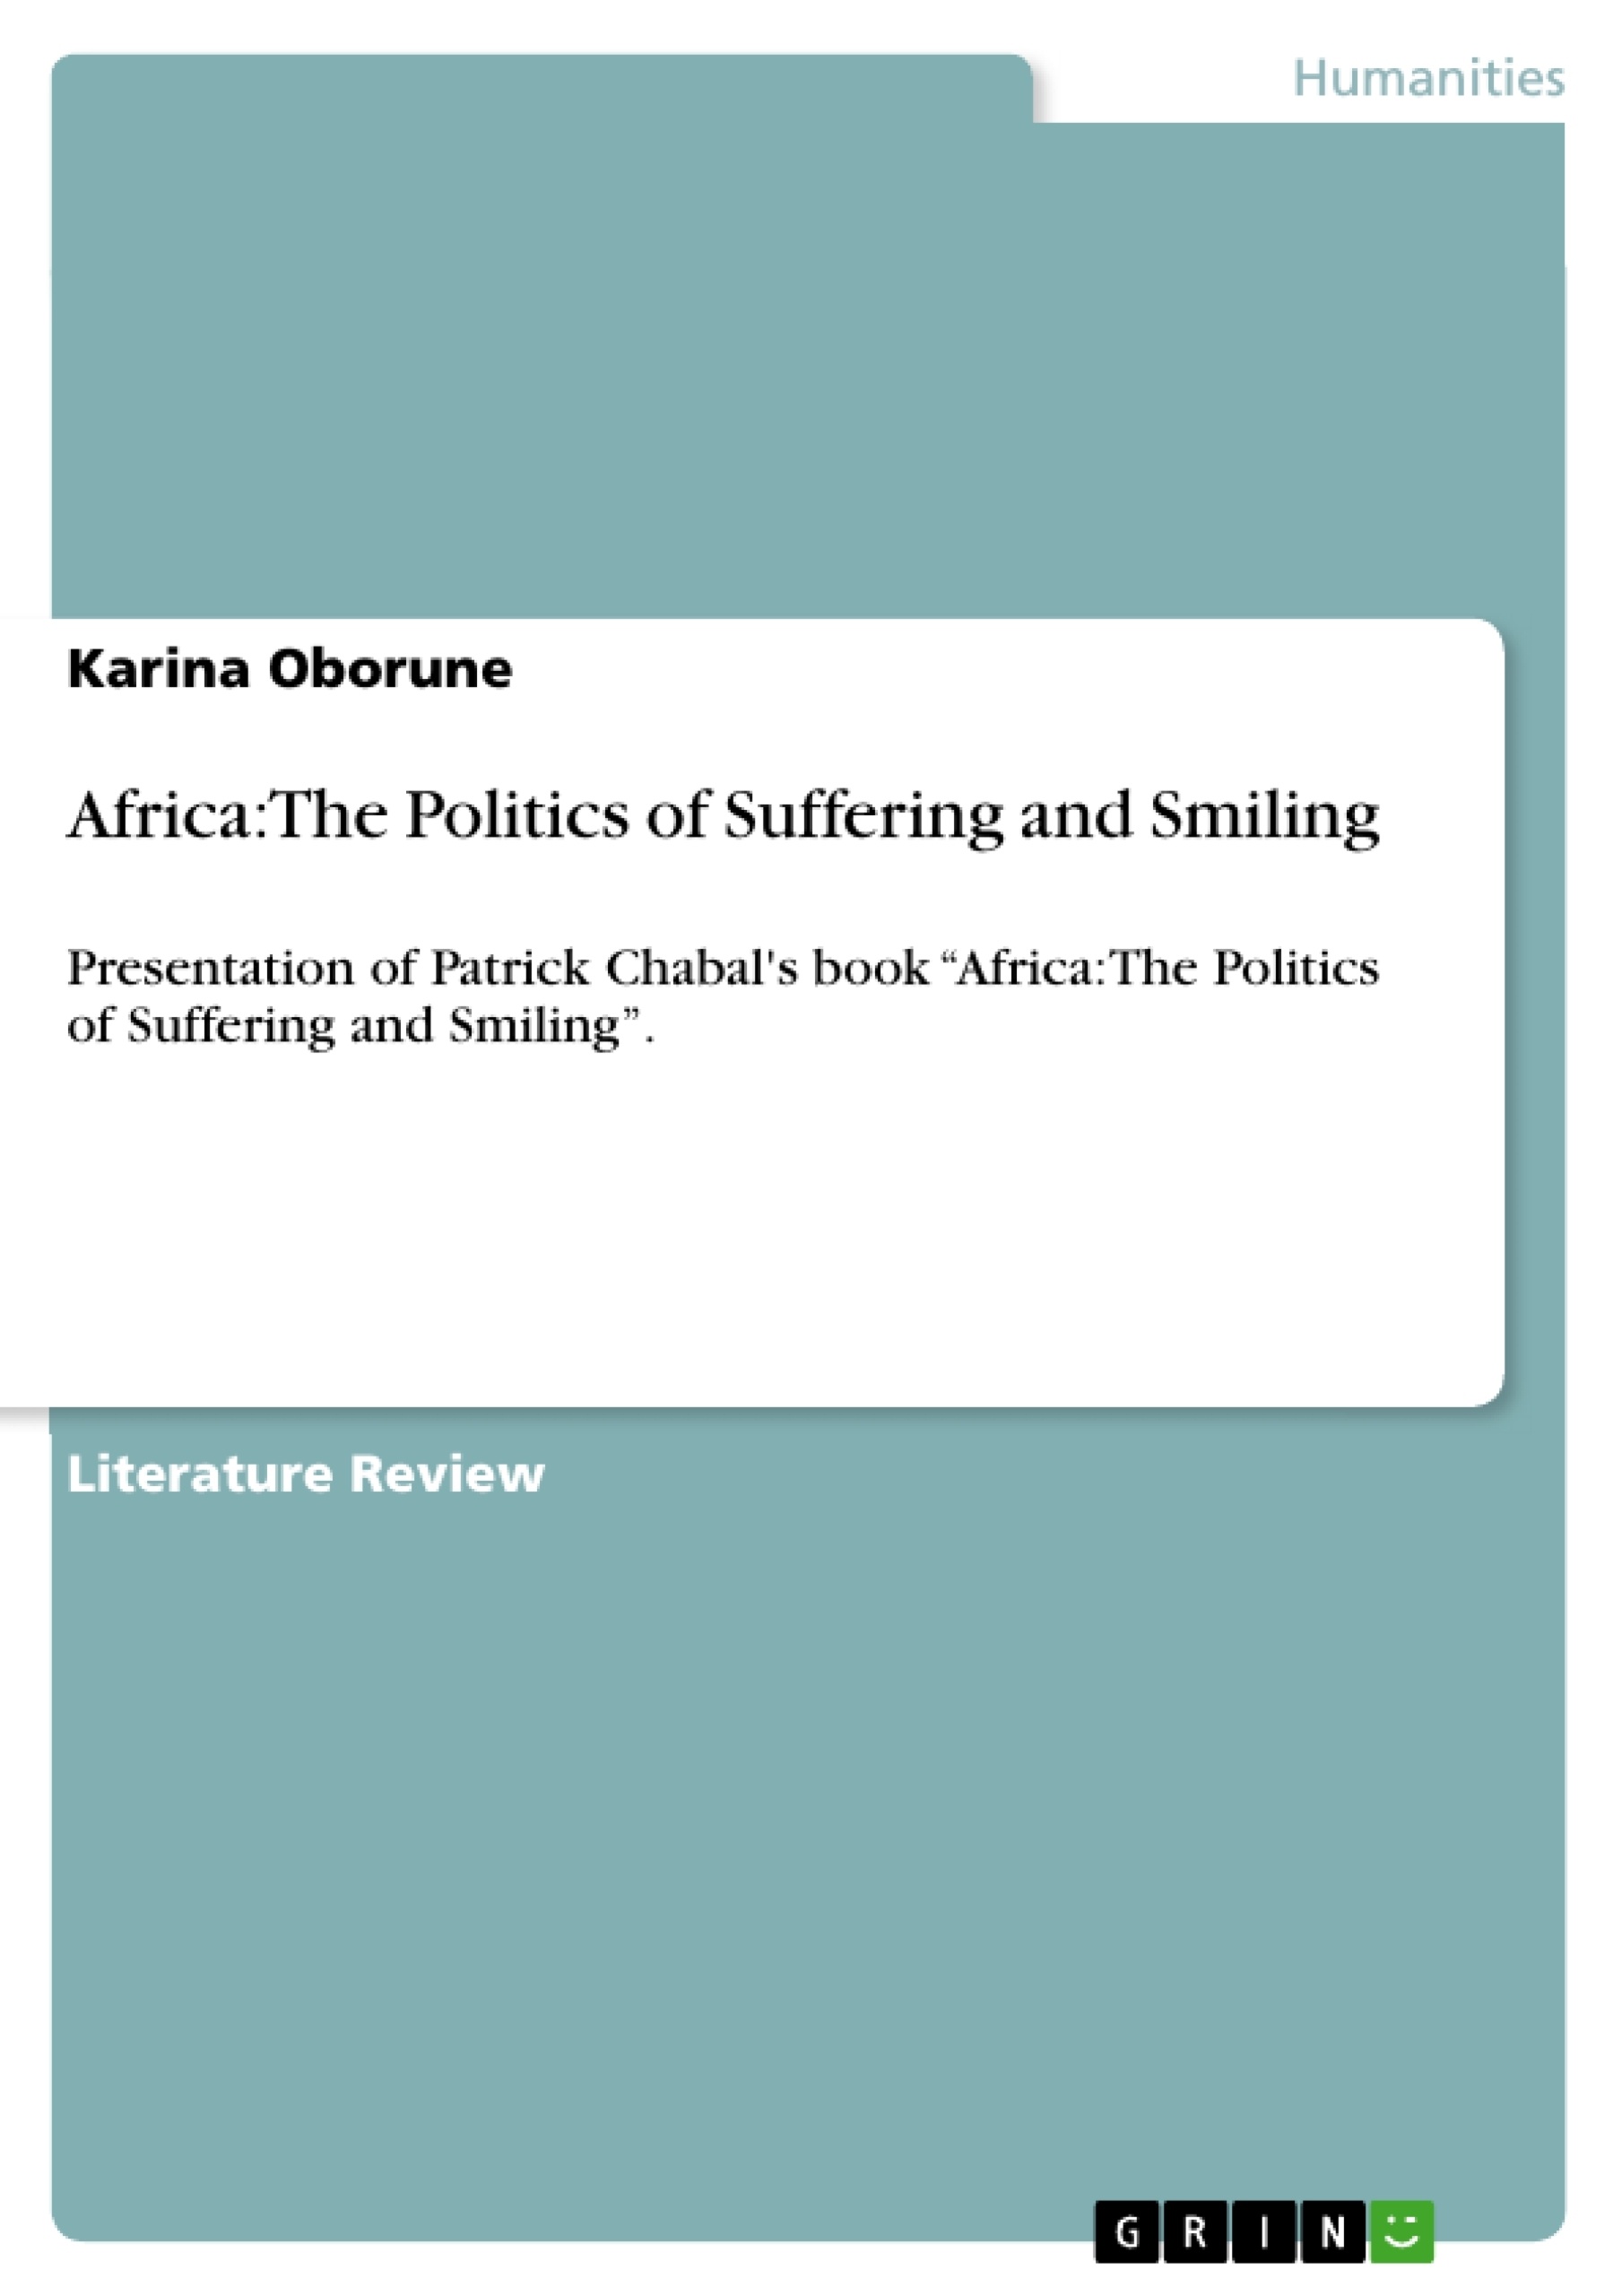 Título: Africa: The Politics of Suffering and Smiling